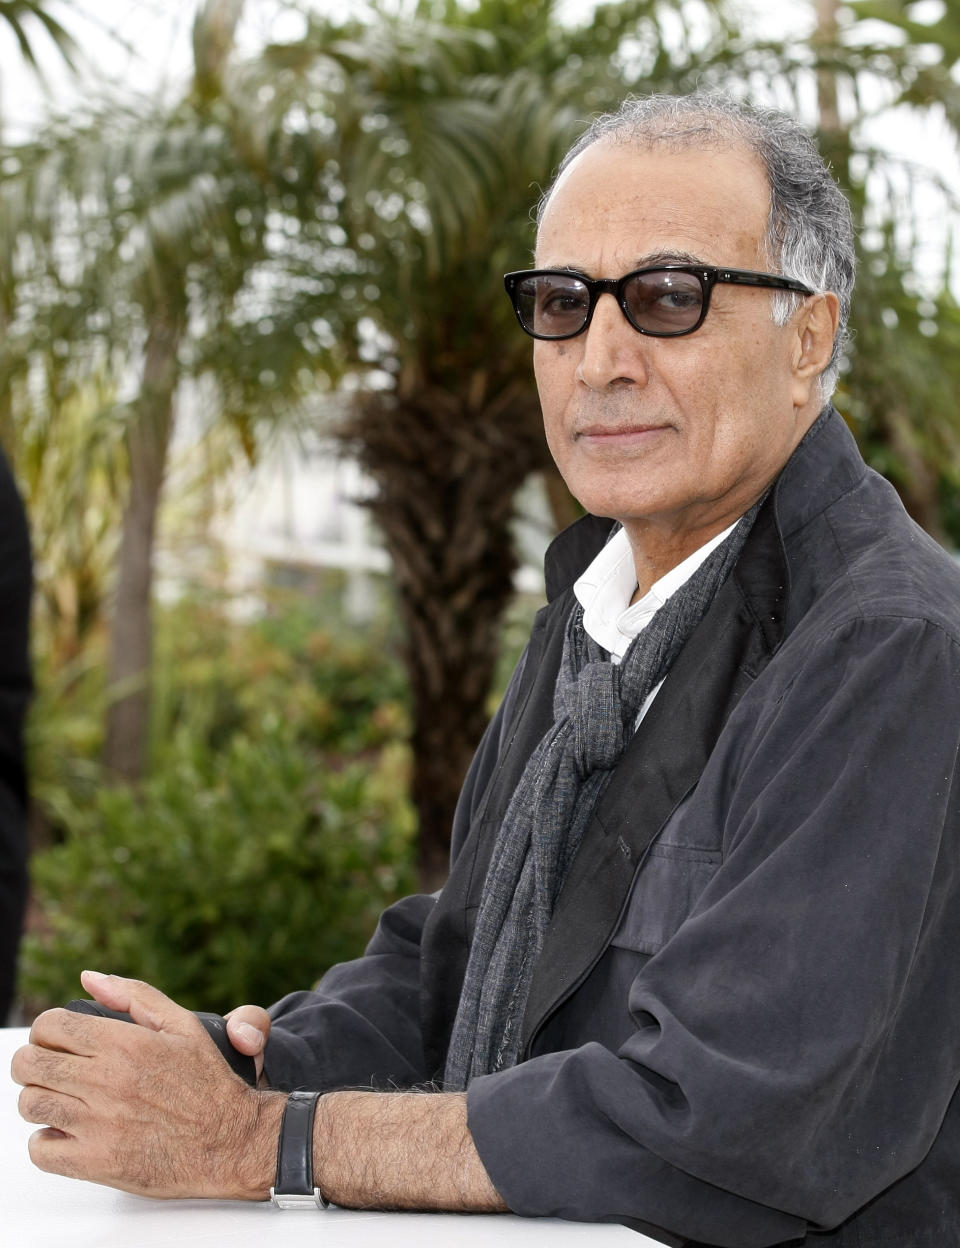 Director Abbas Kiarostami poses during a photo call for Like Somone in Love at the 65th international film festival, in Cannes, southern France, Monday, May 21, 2012. (AP Photo/Lionel Cironneau)